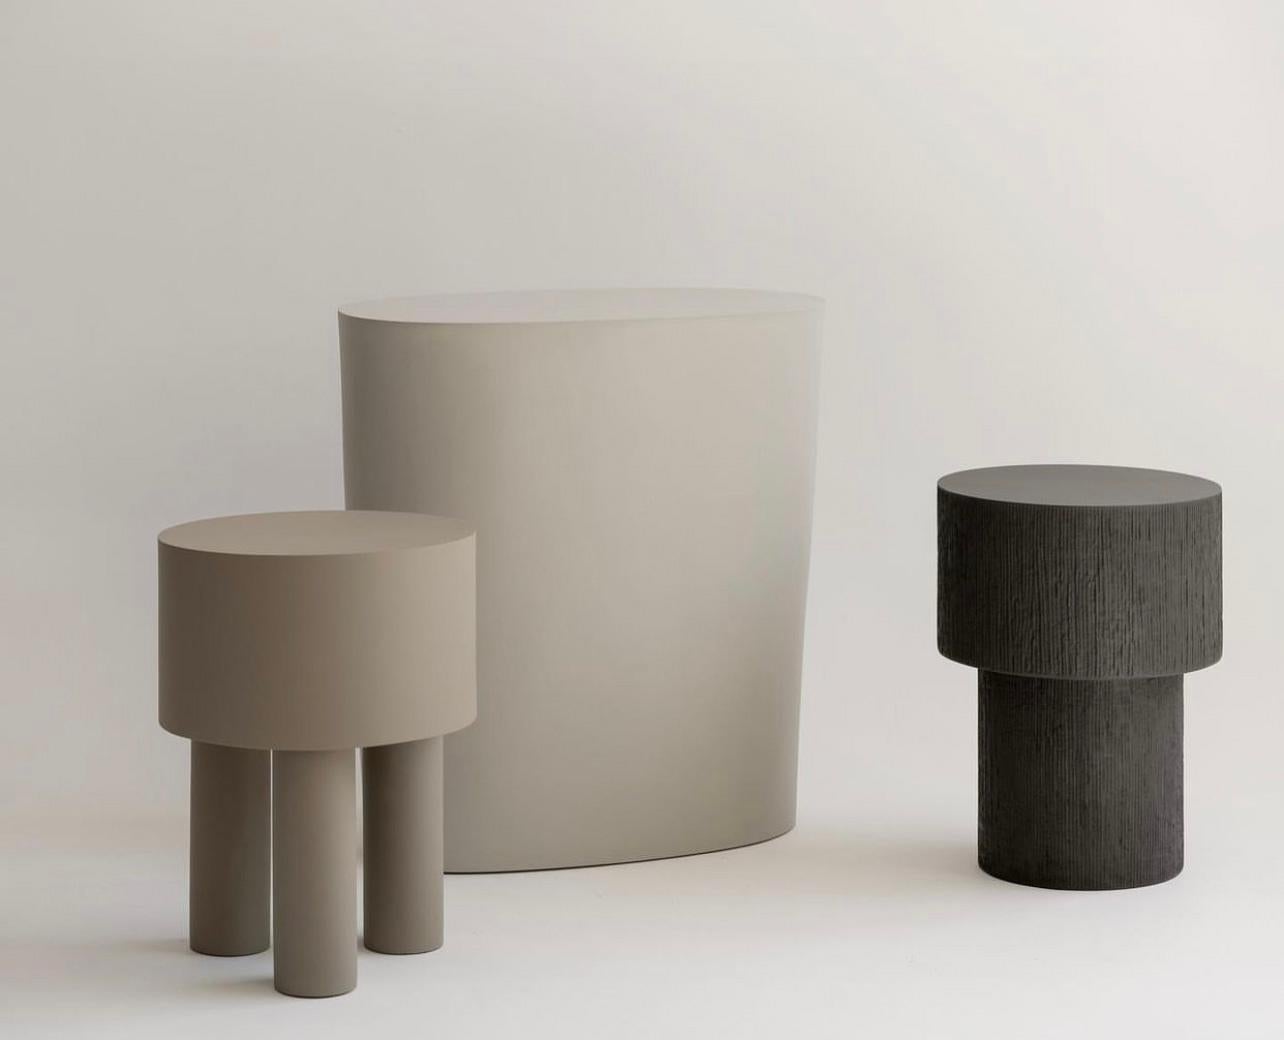 Contemporary Jesmonite side table - Pilotis by Malgorzata Bany.

Inspired by support columns that lift a building above ground or water. Each piece is formed using a mould made of paper, used only once, making each piece unique. Available in